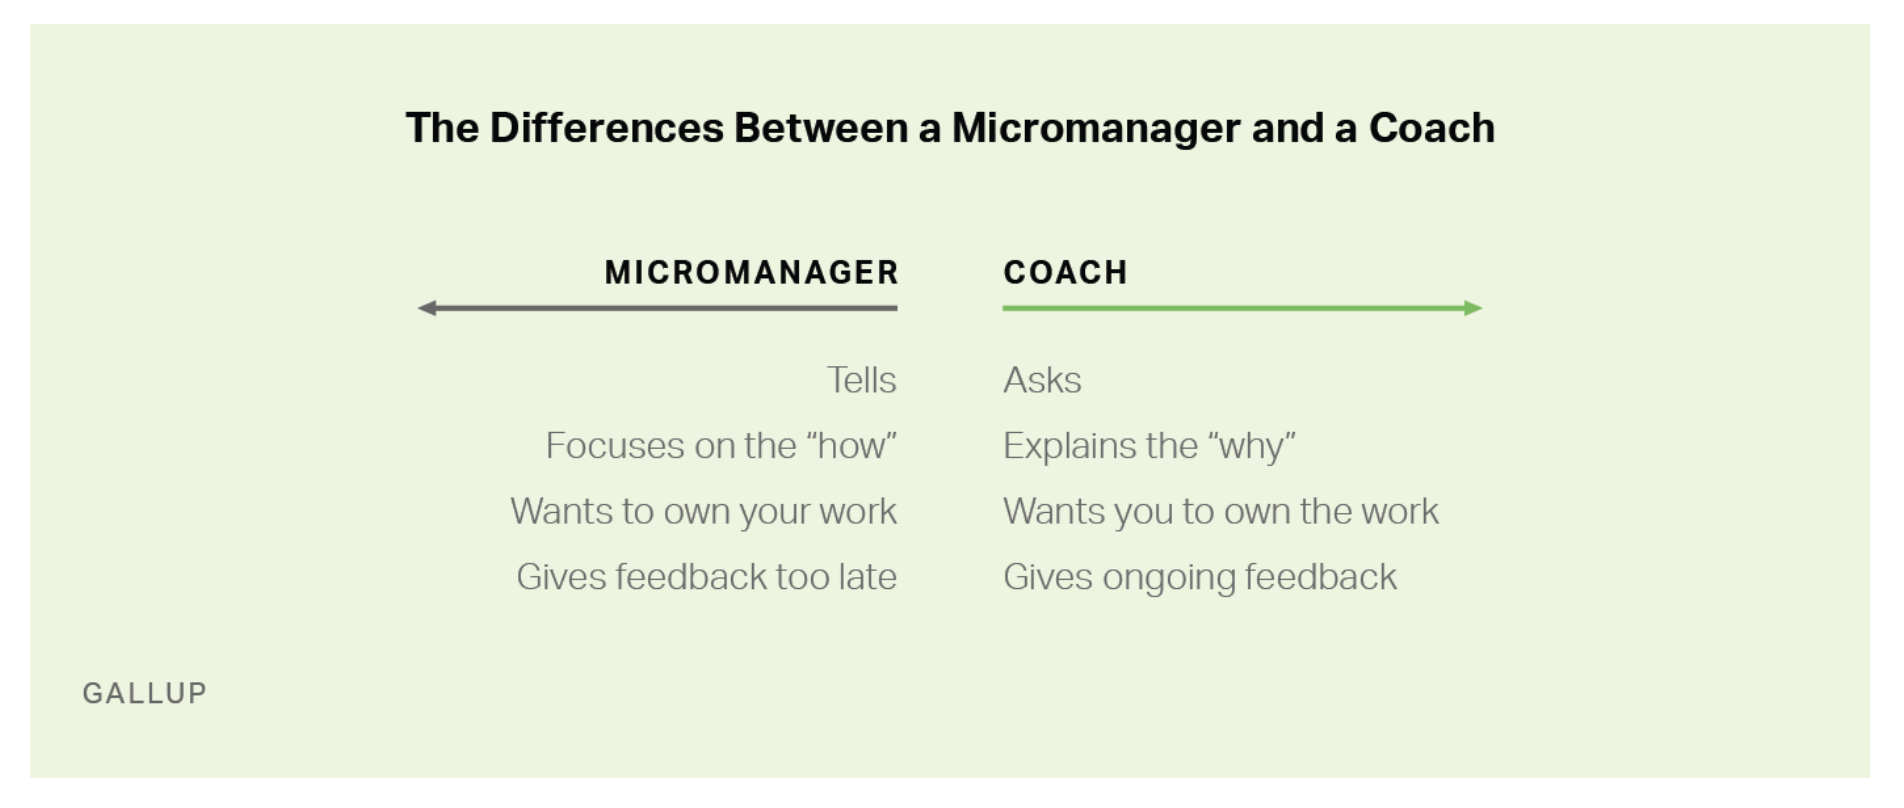 Gallup difference graphic on micromanagers